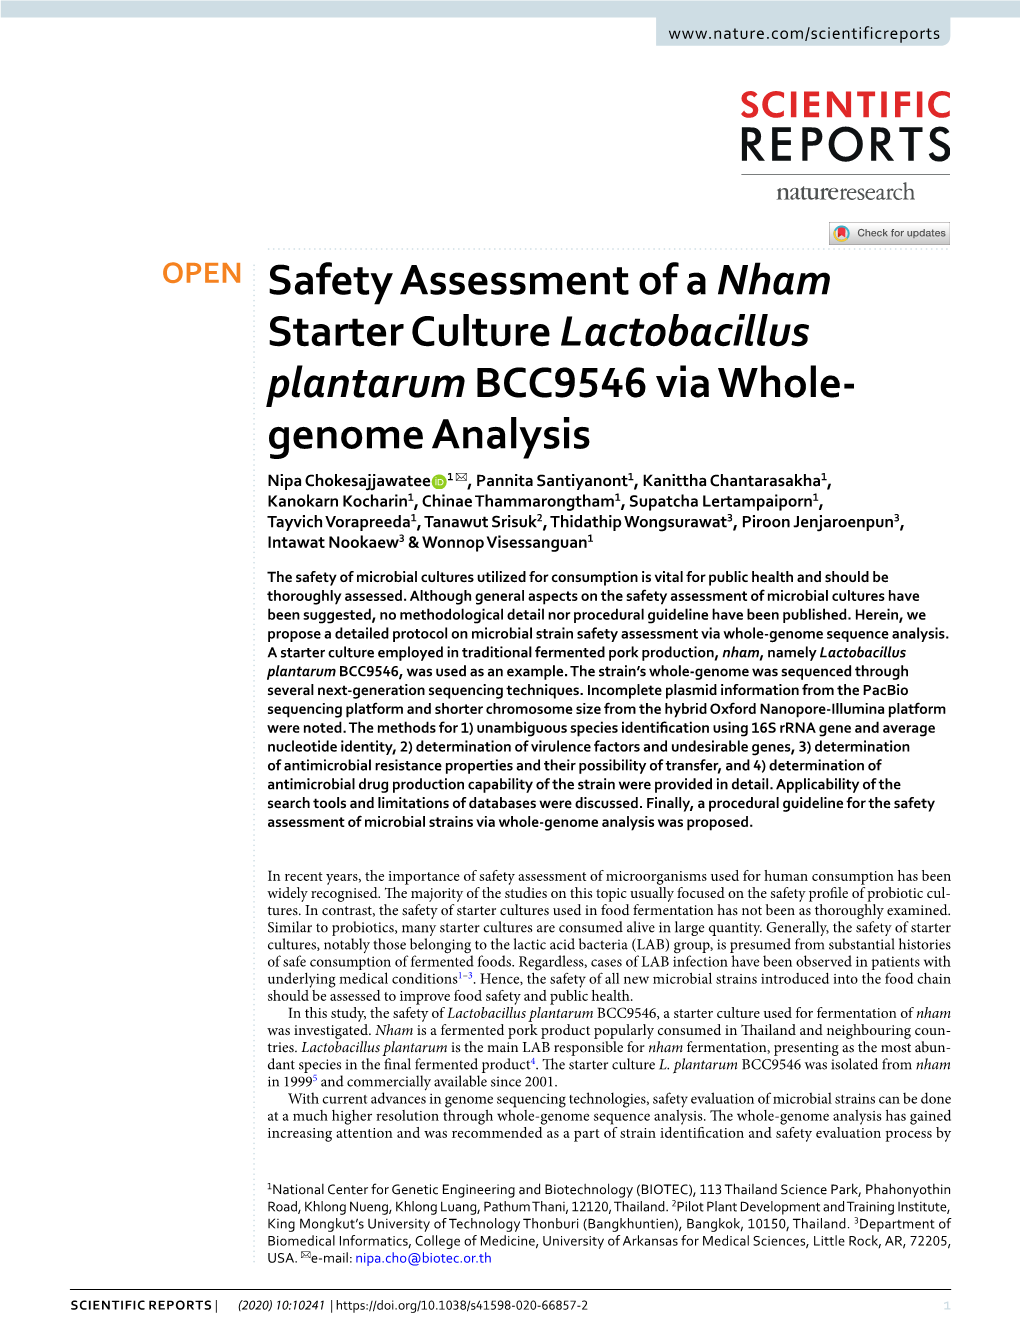 Safety Assessment of a Nham Starter Culture Lactobacillus Plantarum BCC9546 Via Whole-Genome Analysis